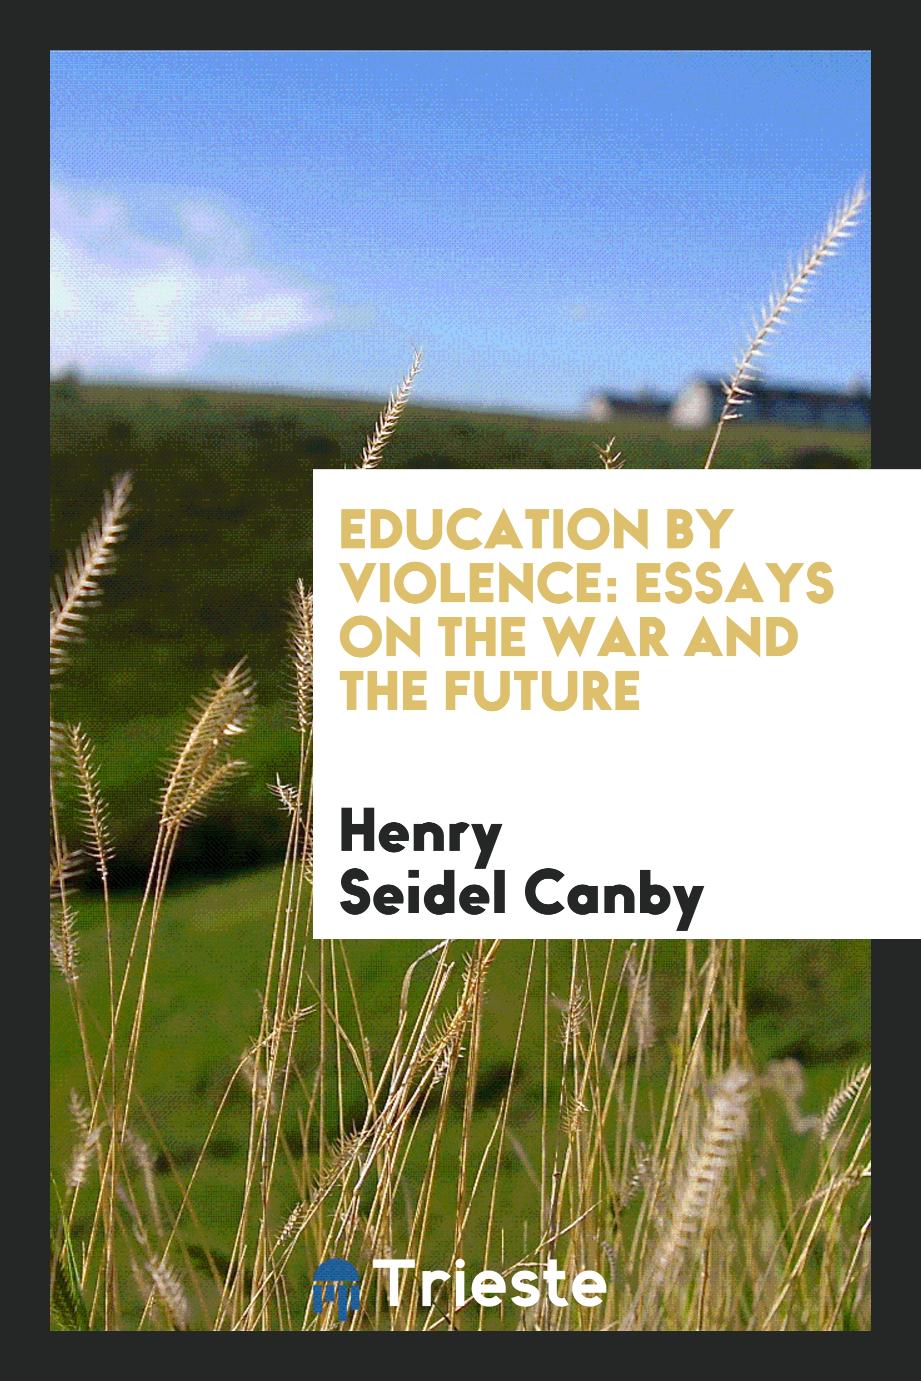 Henry Seidel Canby - Education by Violence: Essays on the War and the Future